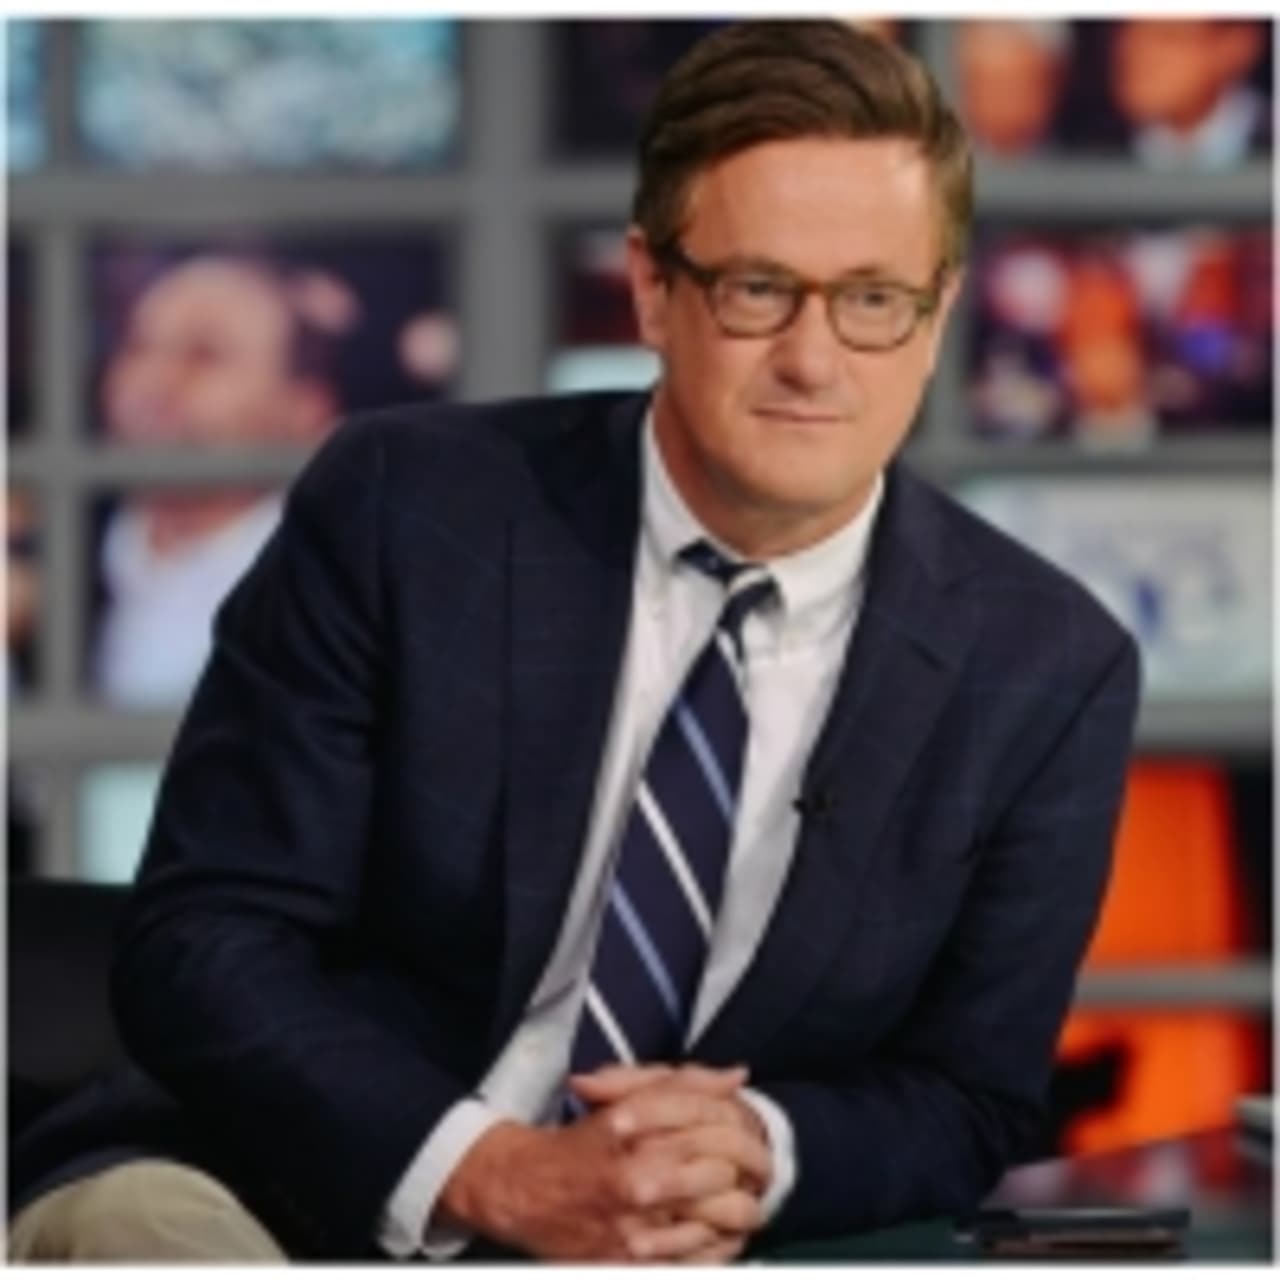 Joe Scarborough makes an appearance at the New Canaan Library on Nov. 15 at 6:30 p.m.